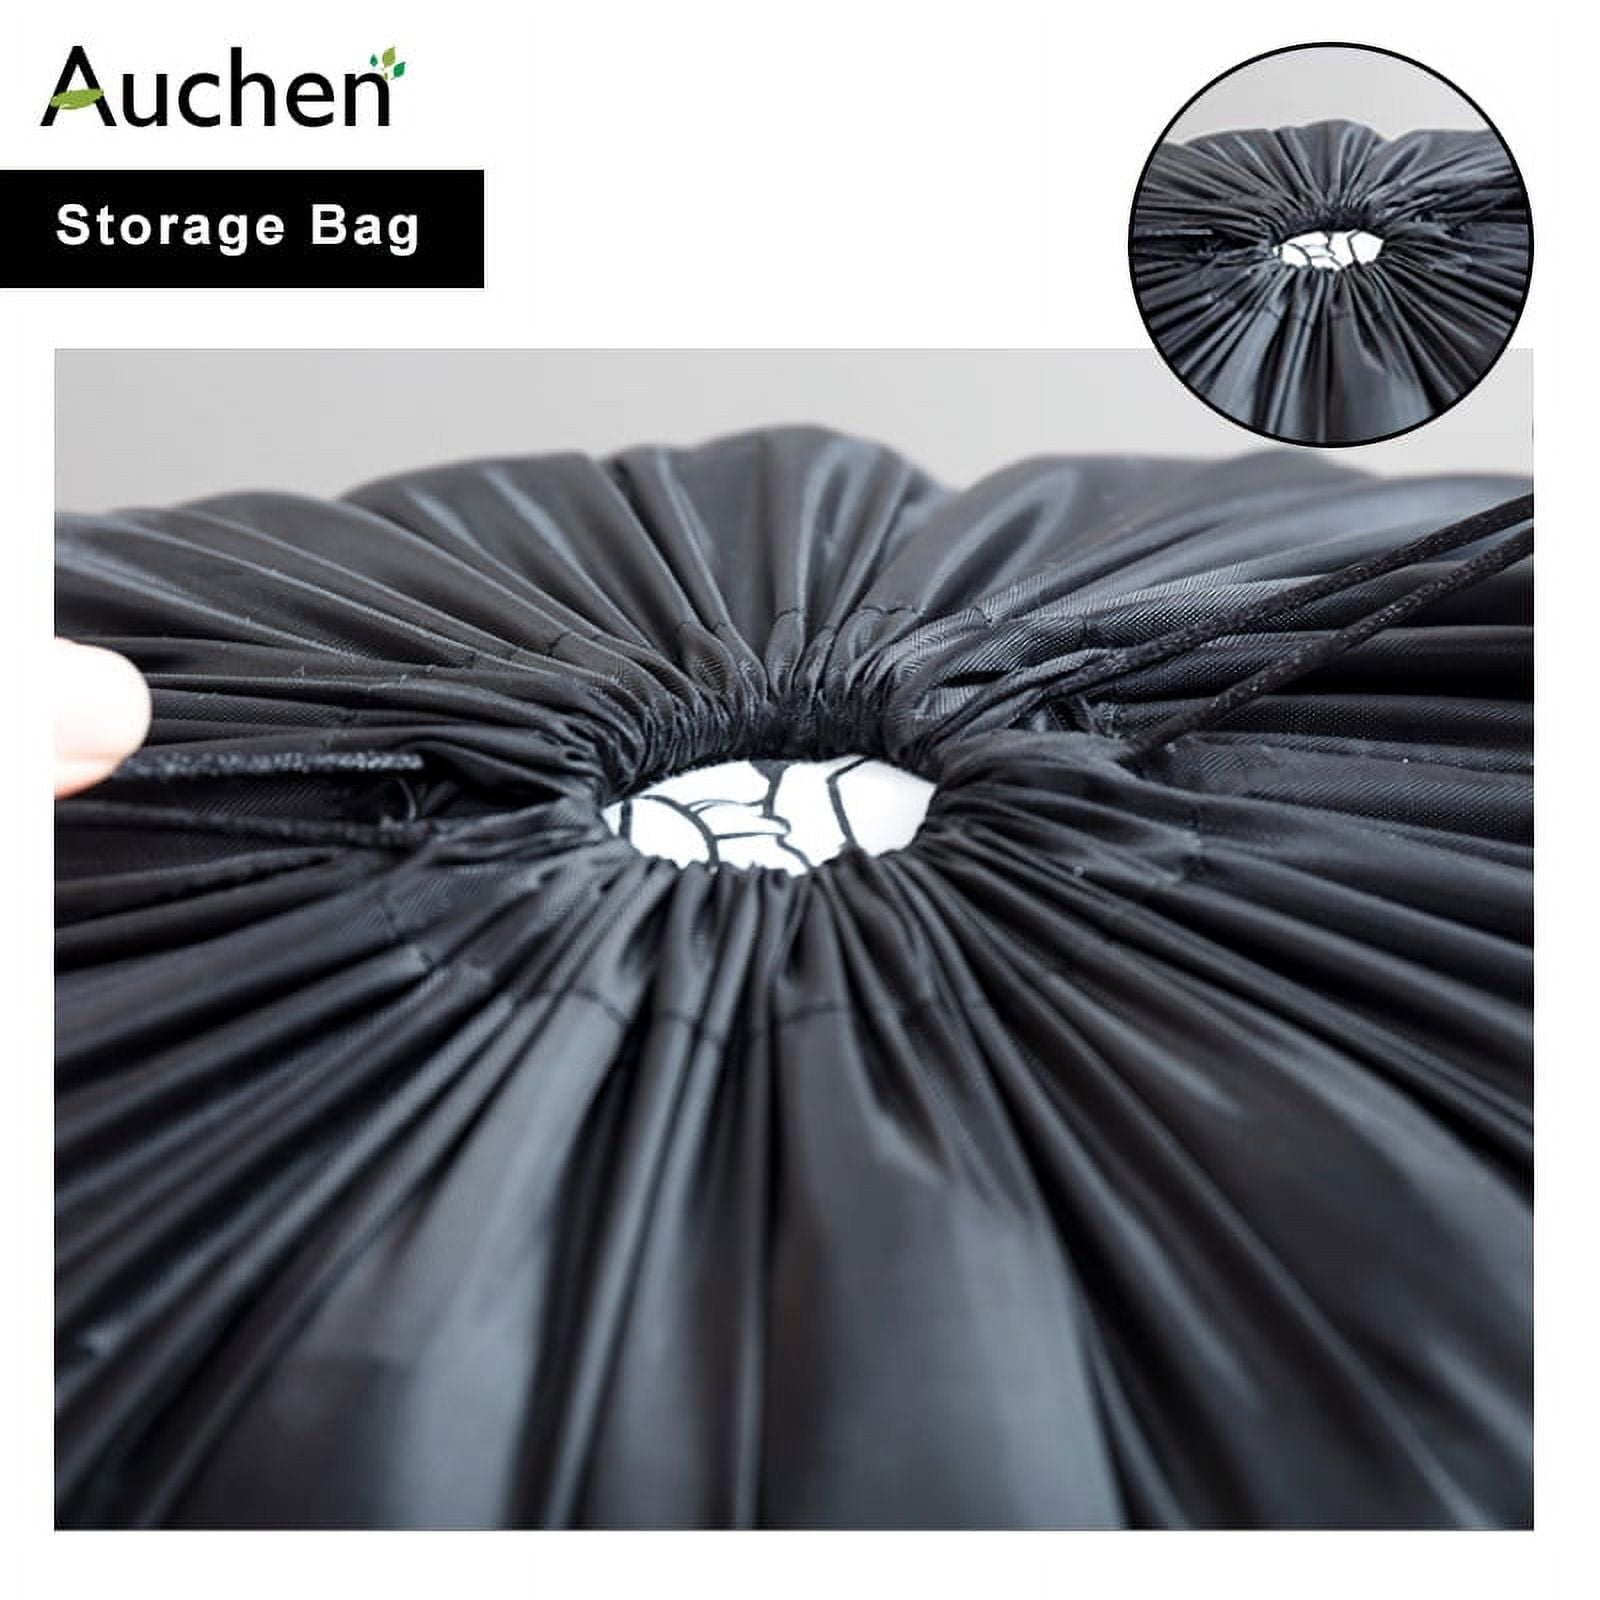 Laidan 3pcs 110L Extra Large Storage Bags for Moving, Heavy Duty Under Bed Storage Laundry Bag with Zip for Clothes Duvet Travel Camping, Black